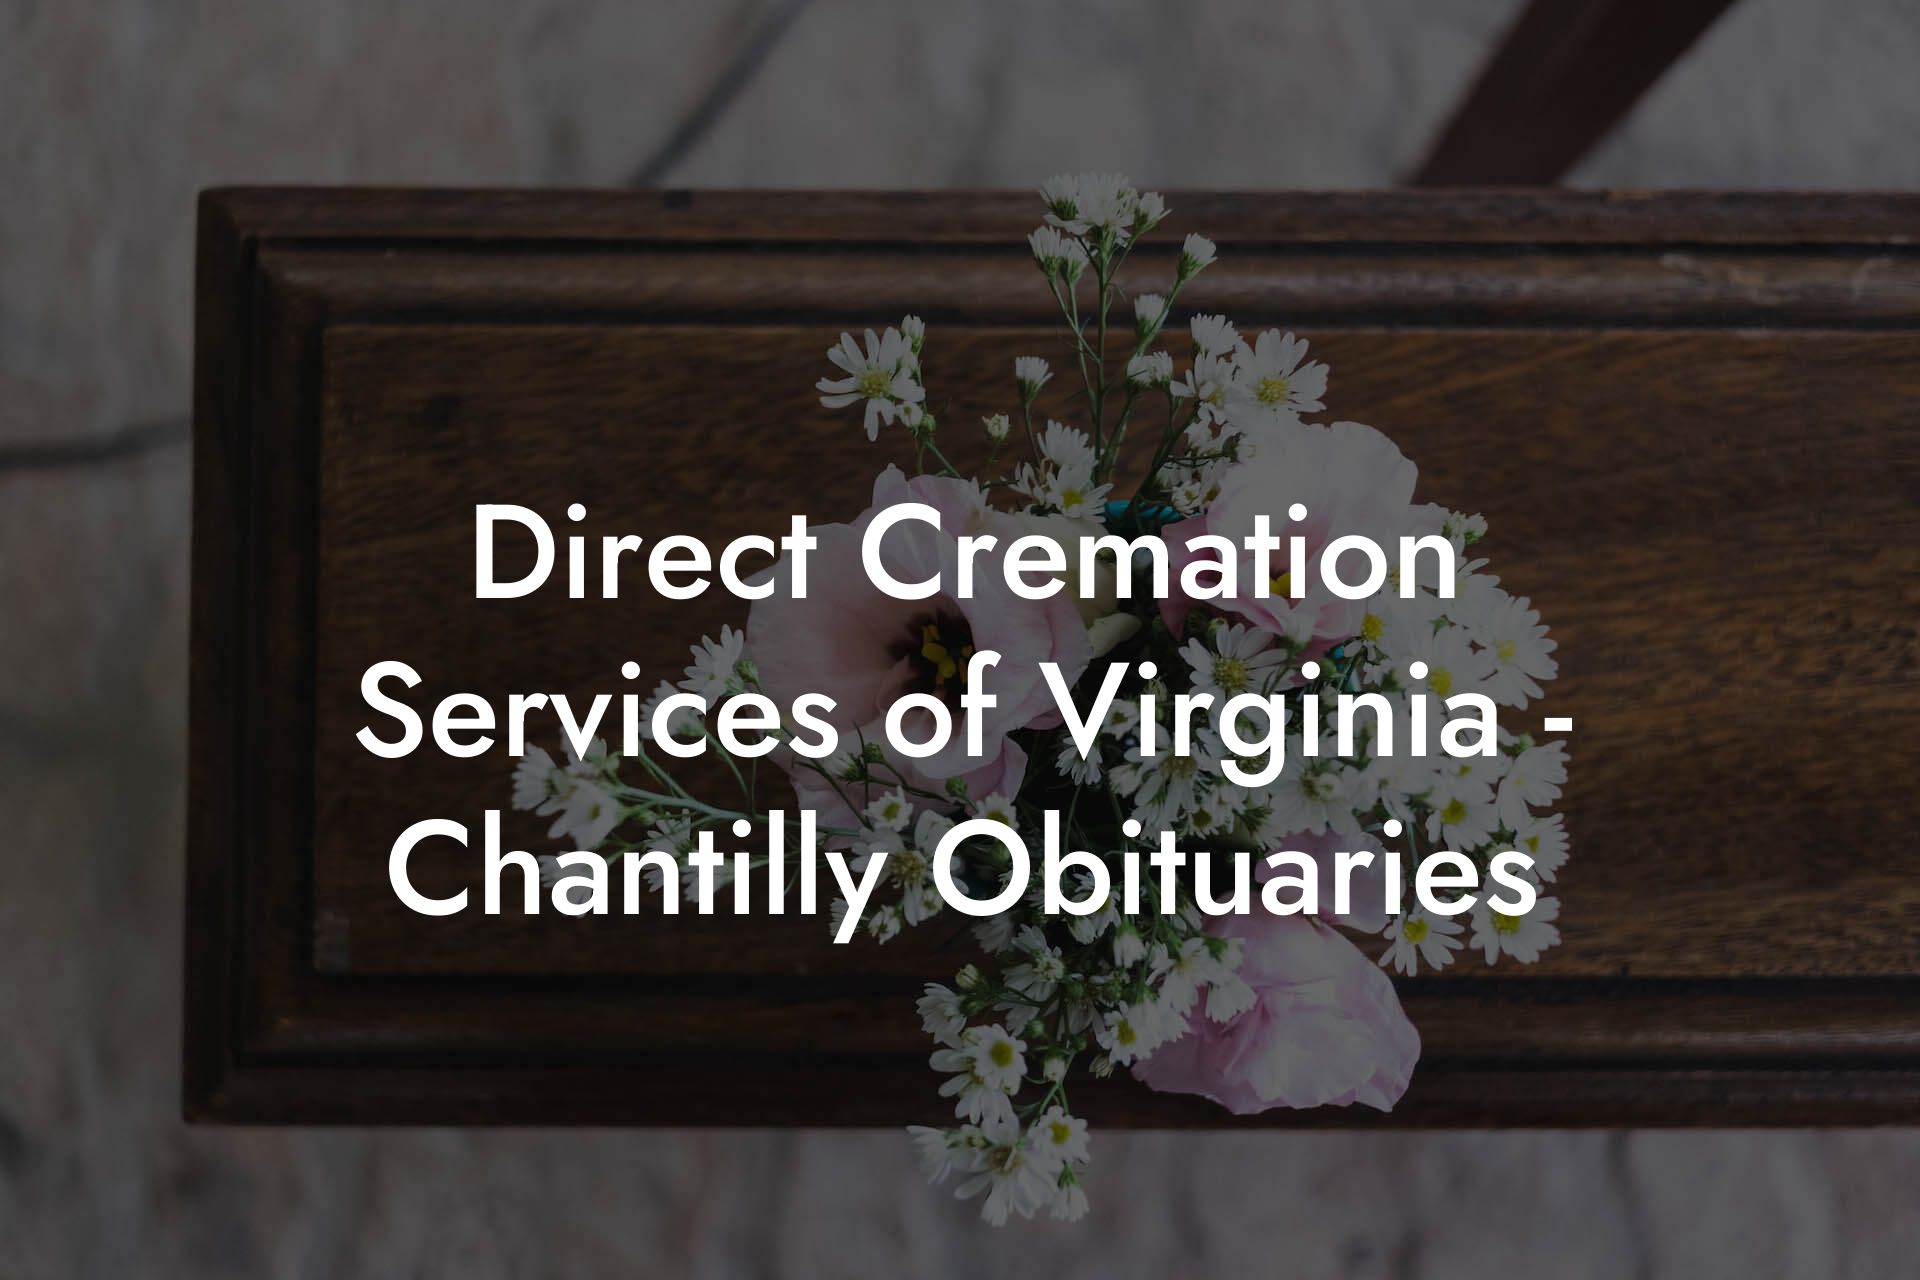 Direct Cremation Services of Virginia - Chantilly Obituaries